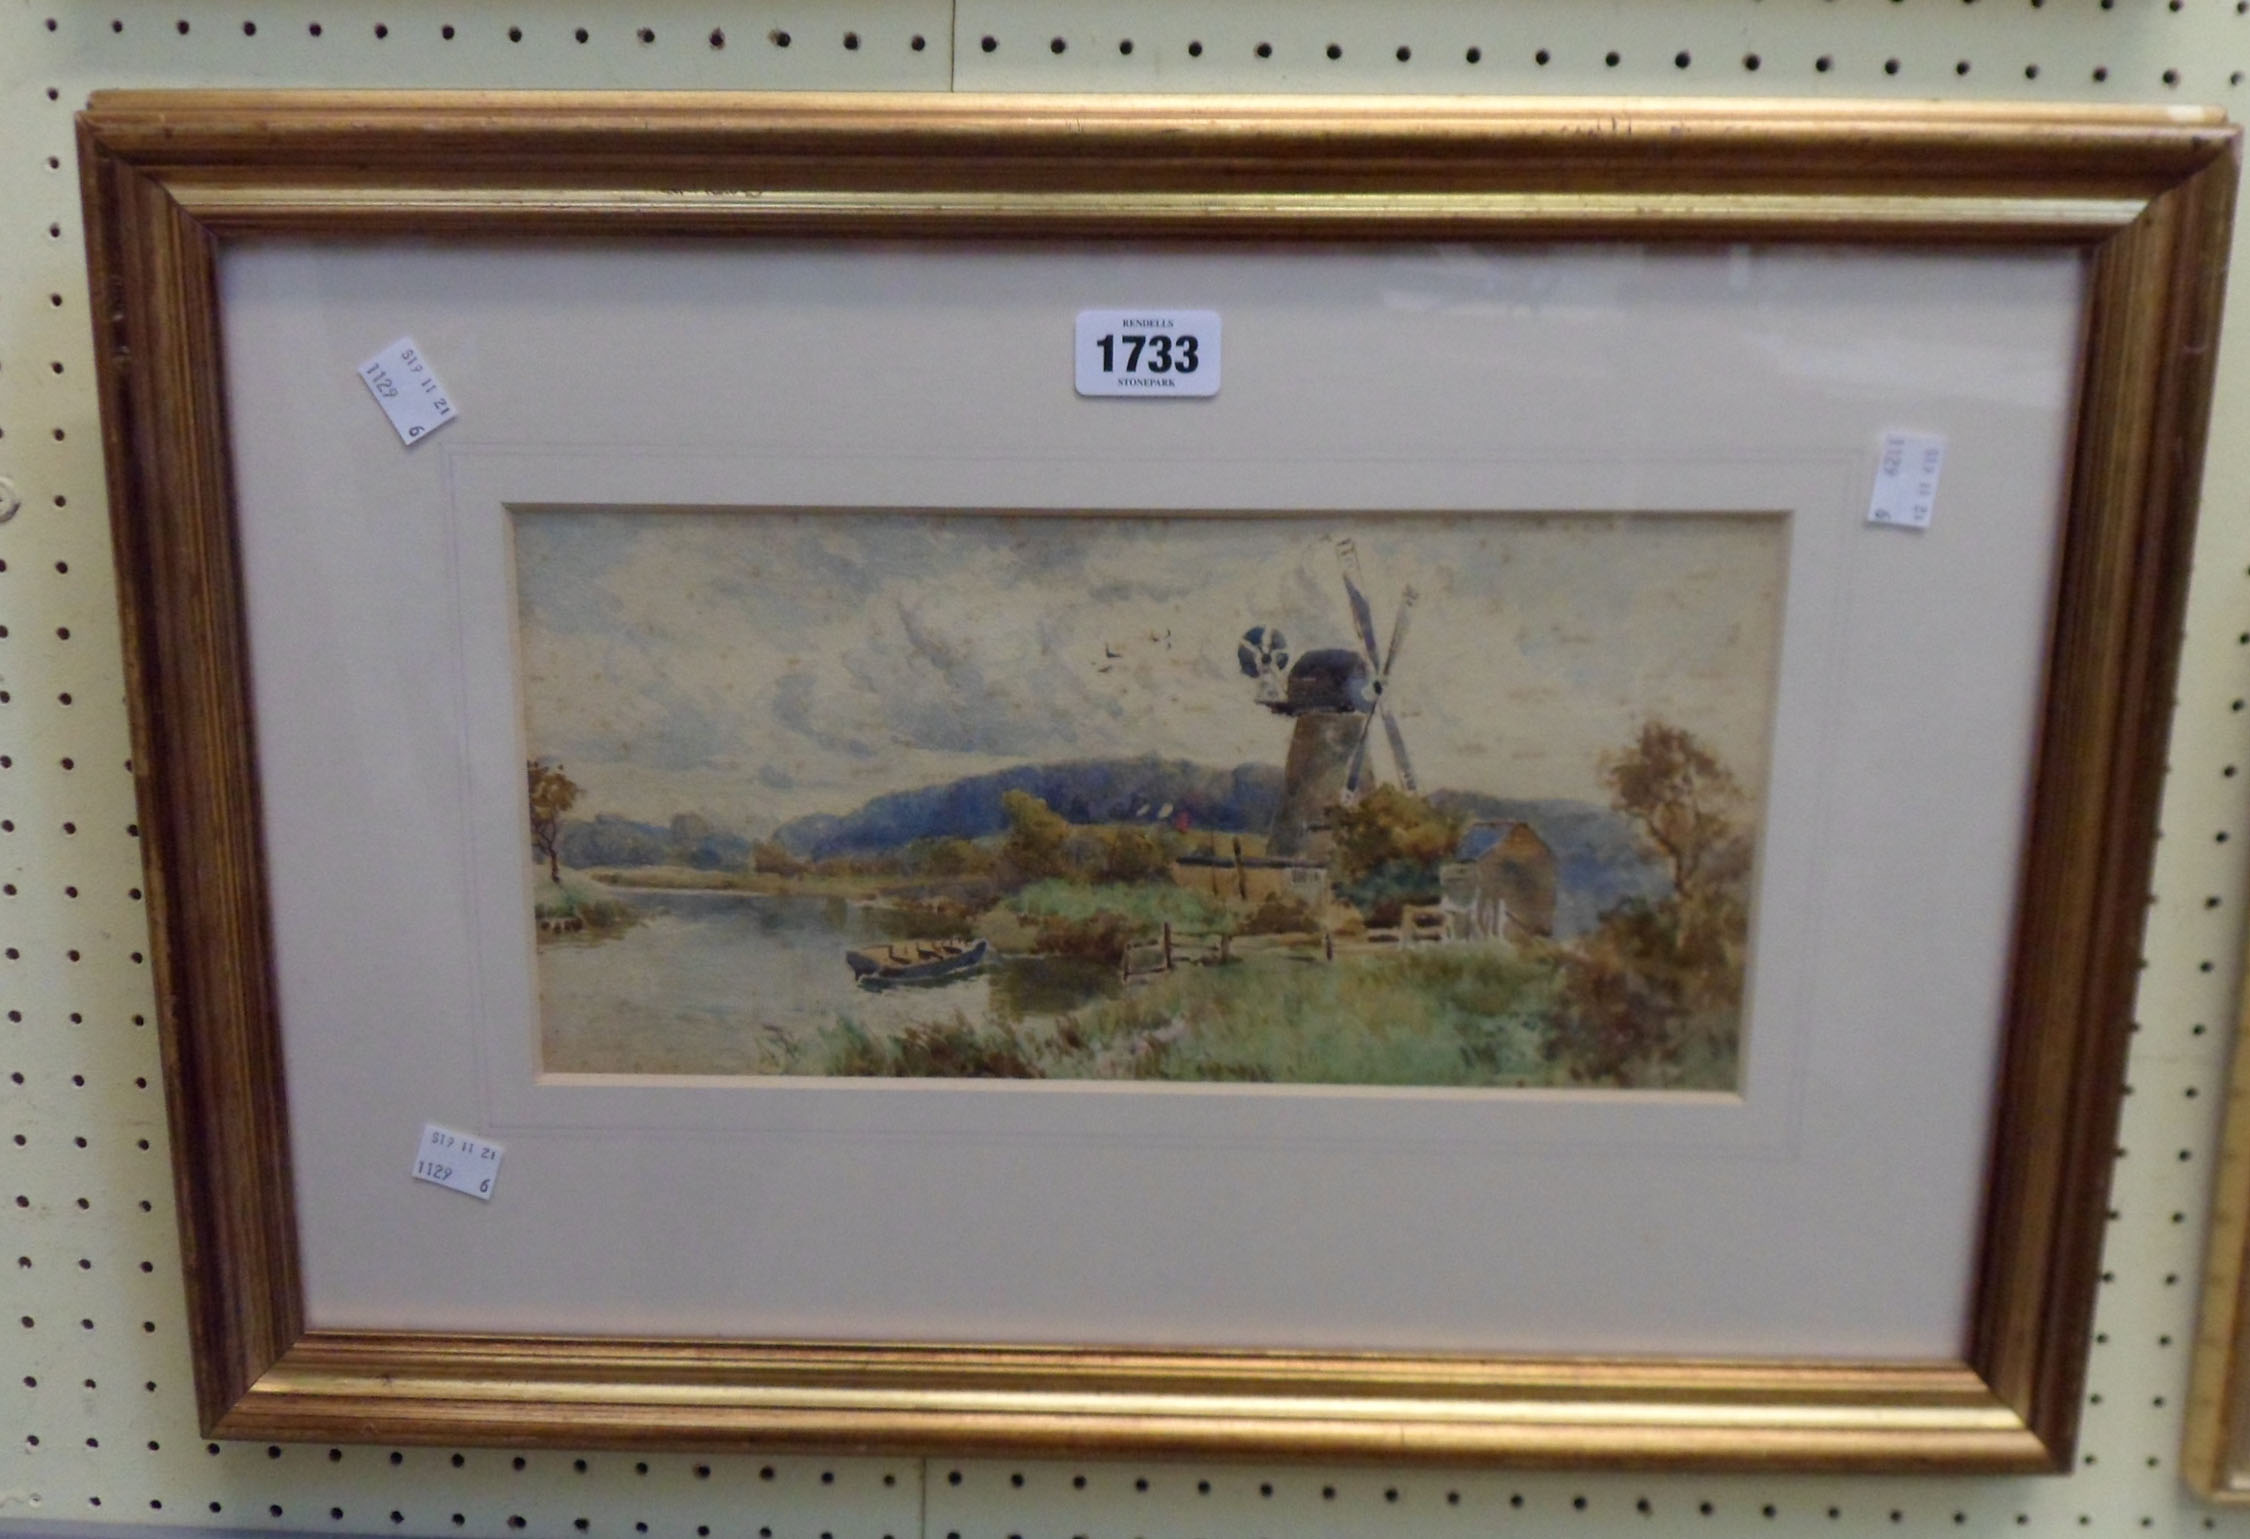 Tom Lloyd: a gilt framed watercolour, depicting a waterside windmill and rowing boat - ink written